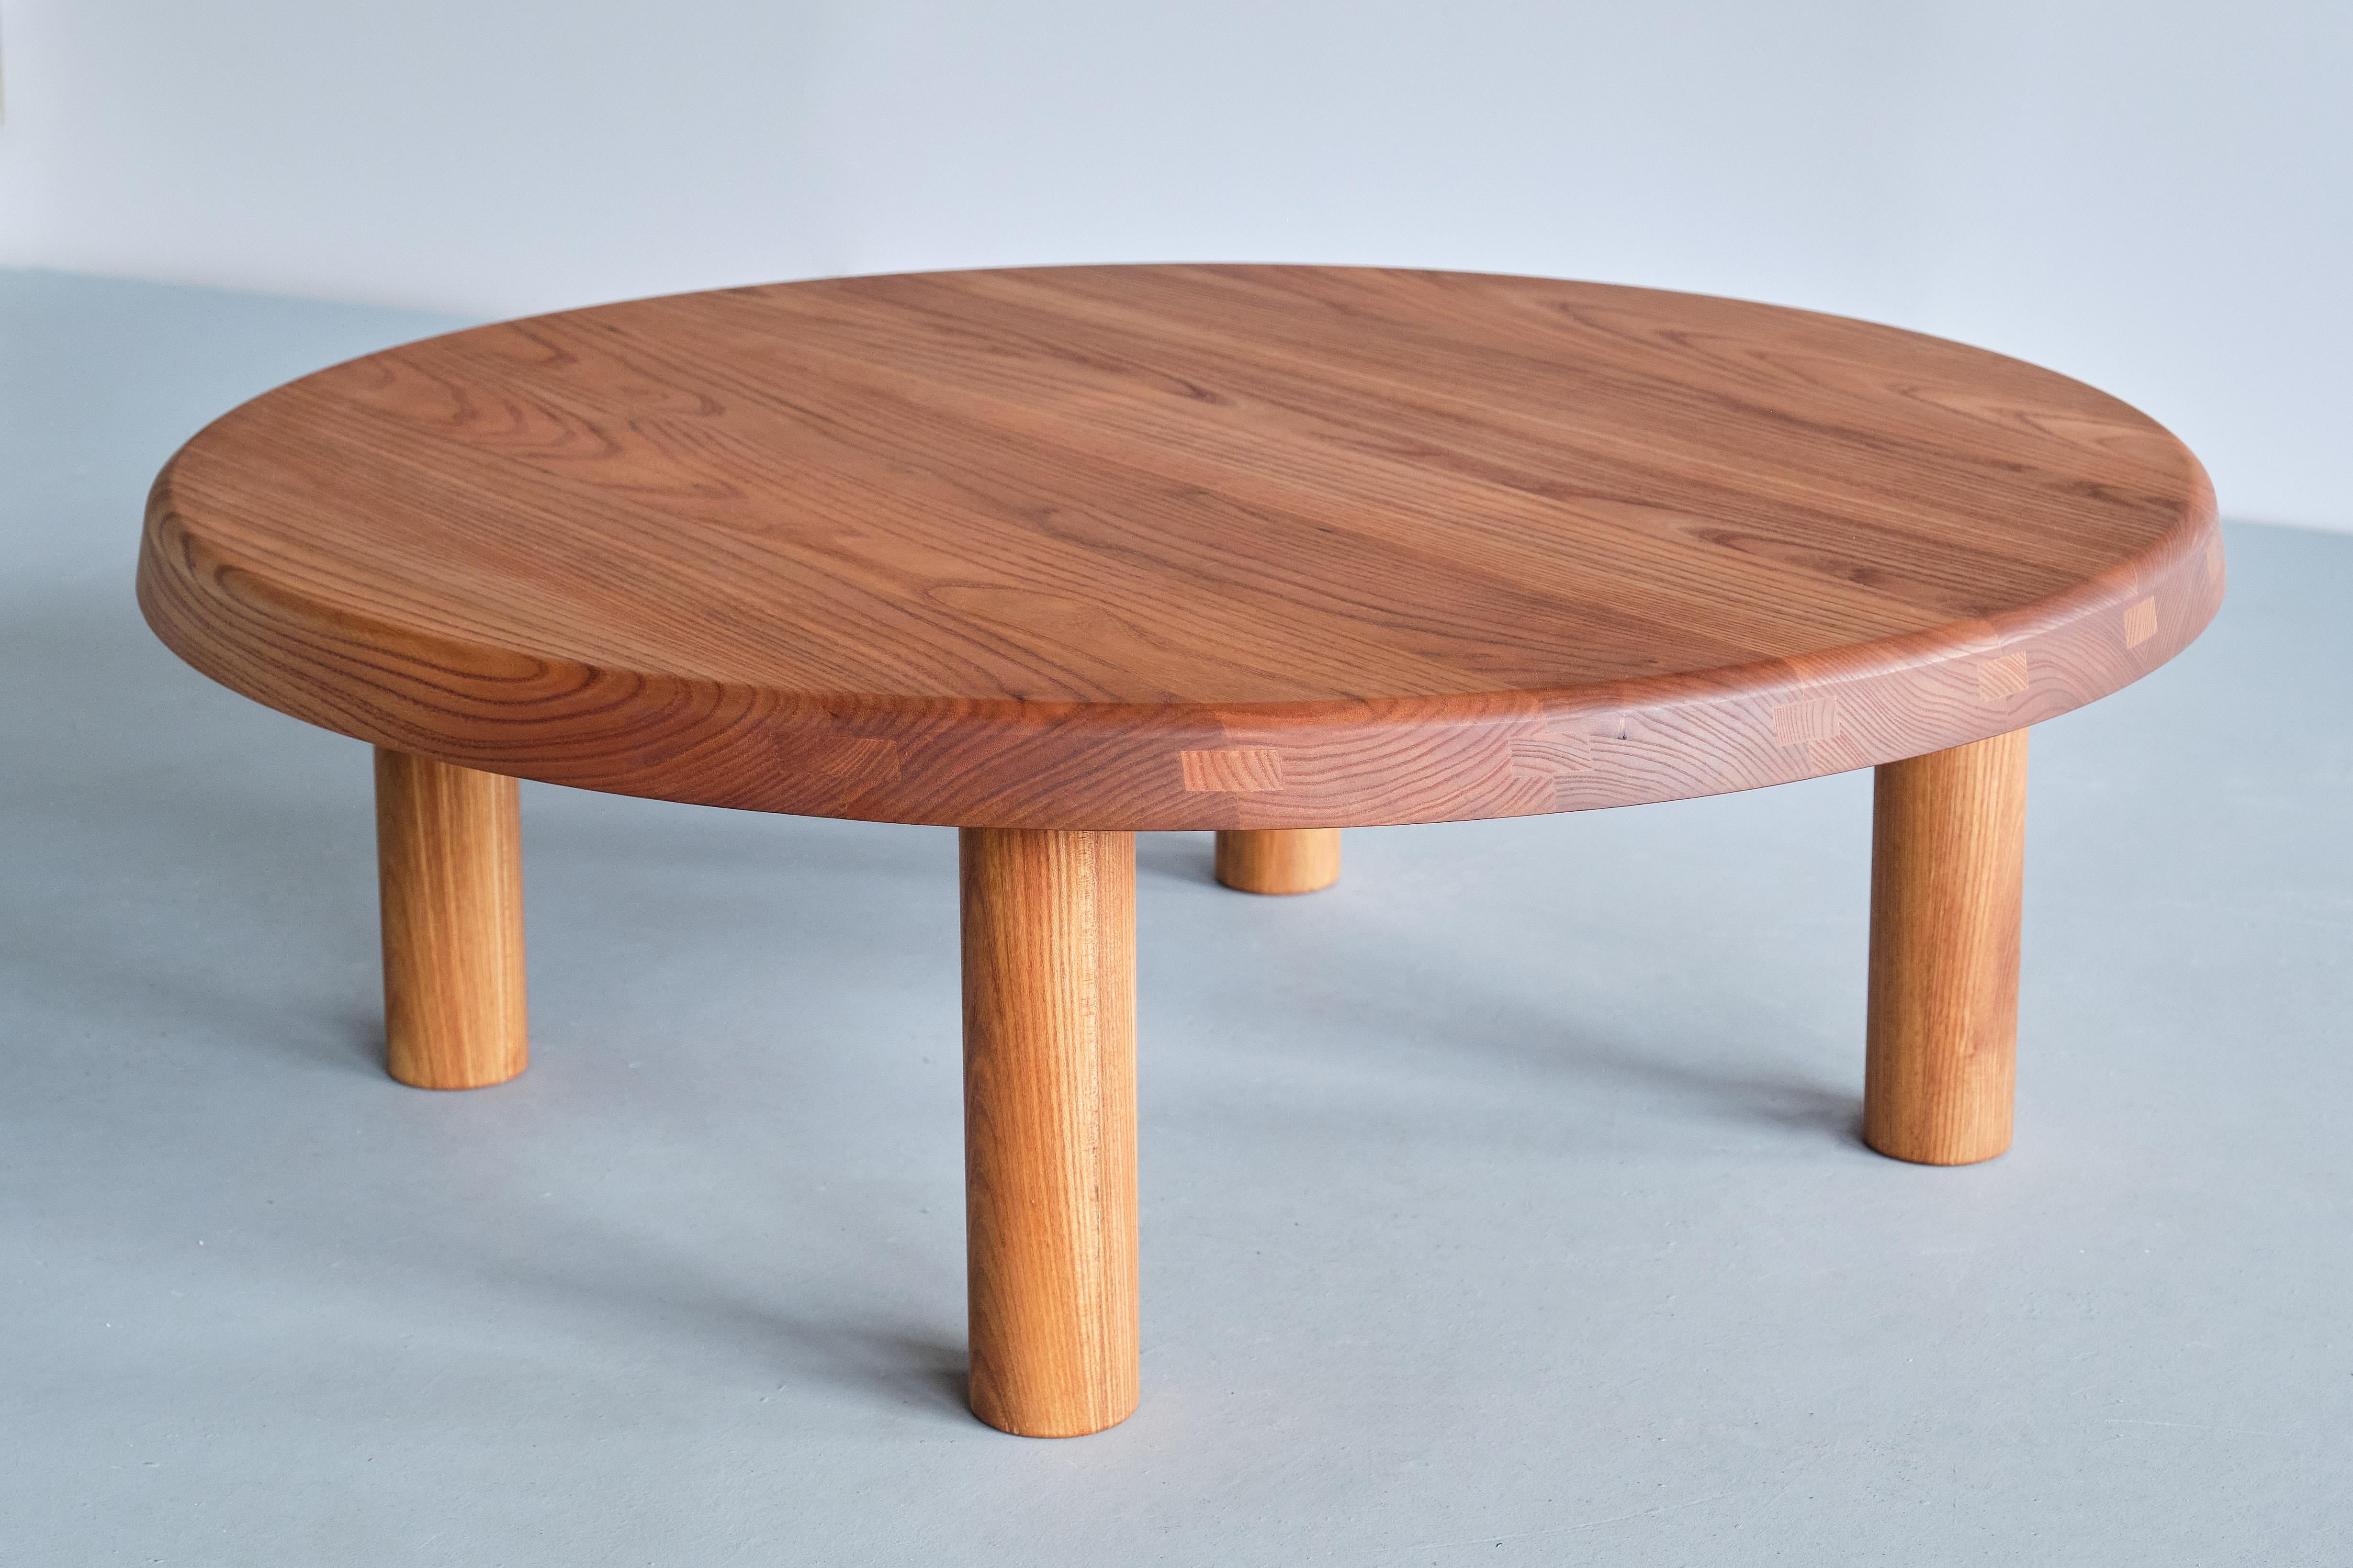 This striking coffee table is the model T02M designed by Pierre Chapo in 1963. This iconic table is made of solid elm wood with a beautiful grain. Up to 1973 the T02 model was the only round table in the Chapo catalog. An unquestionably timeless and